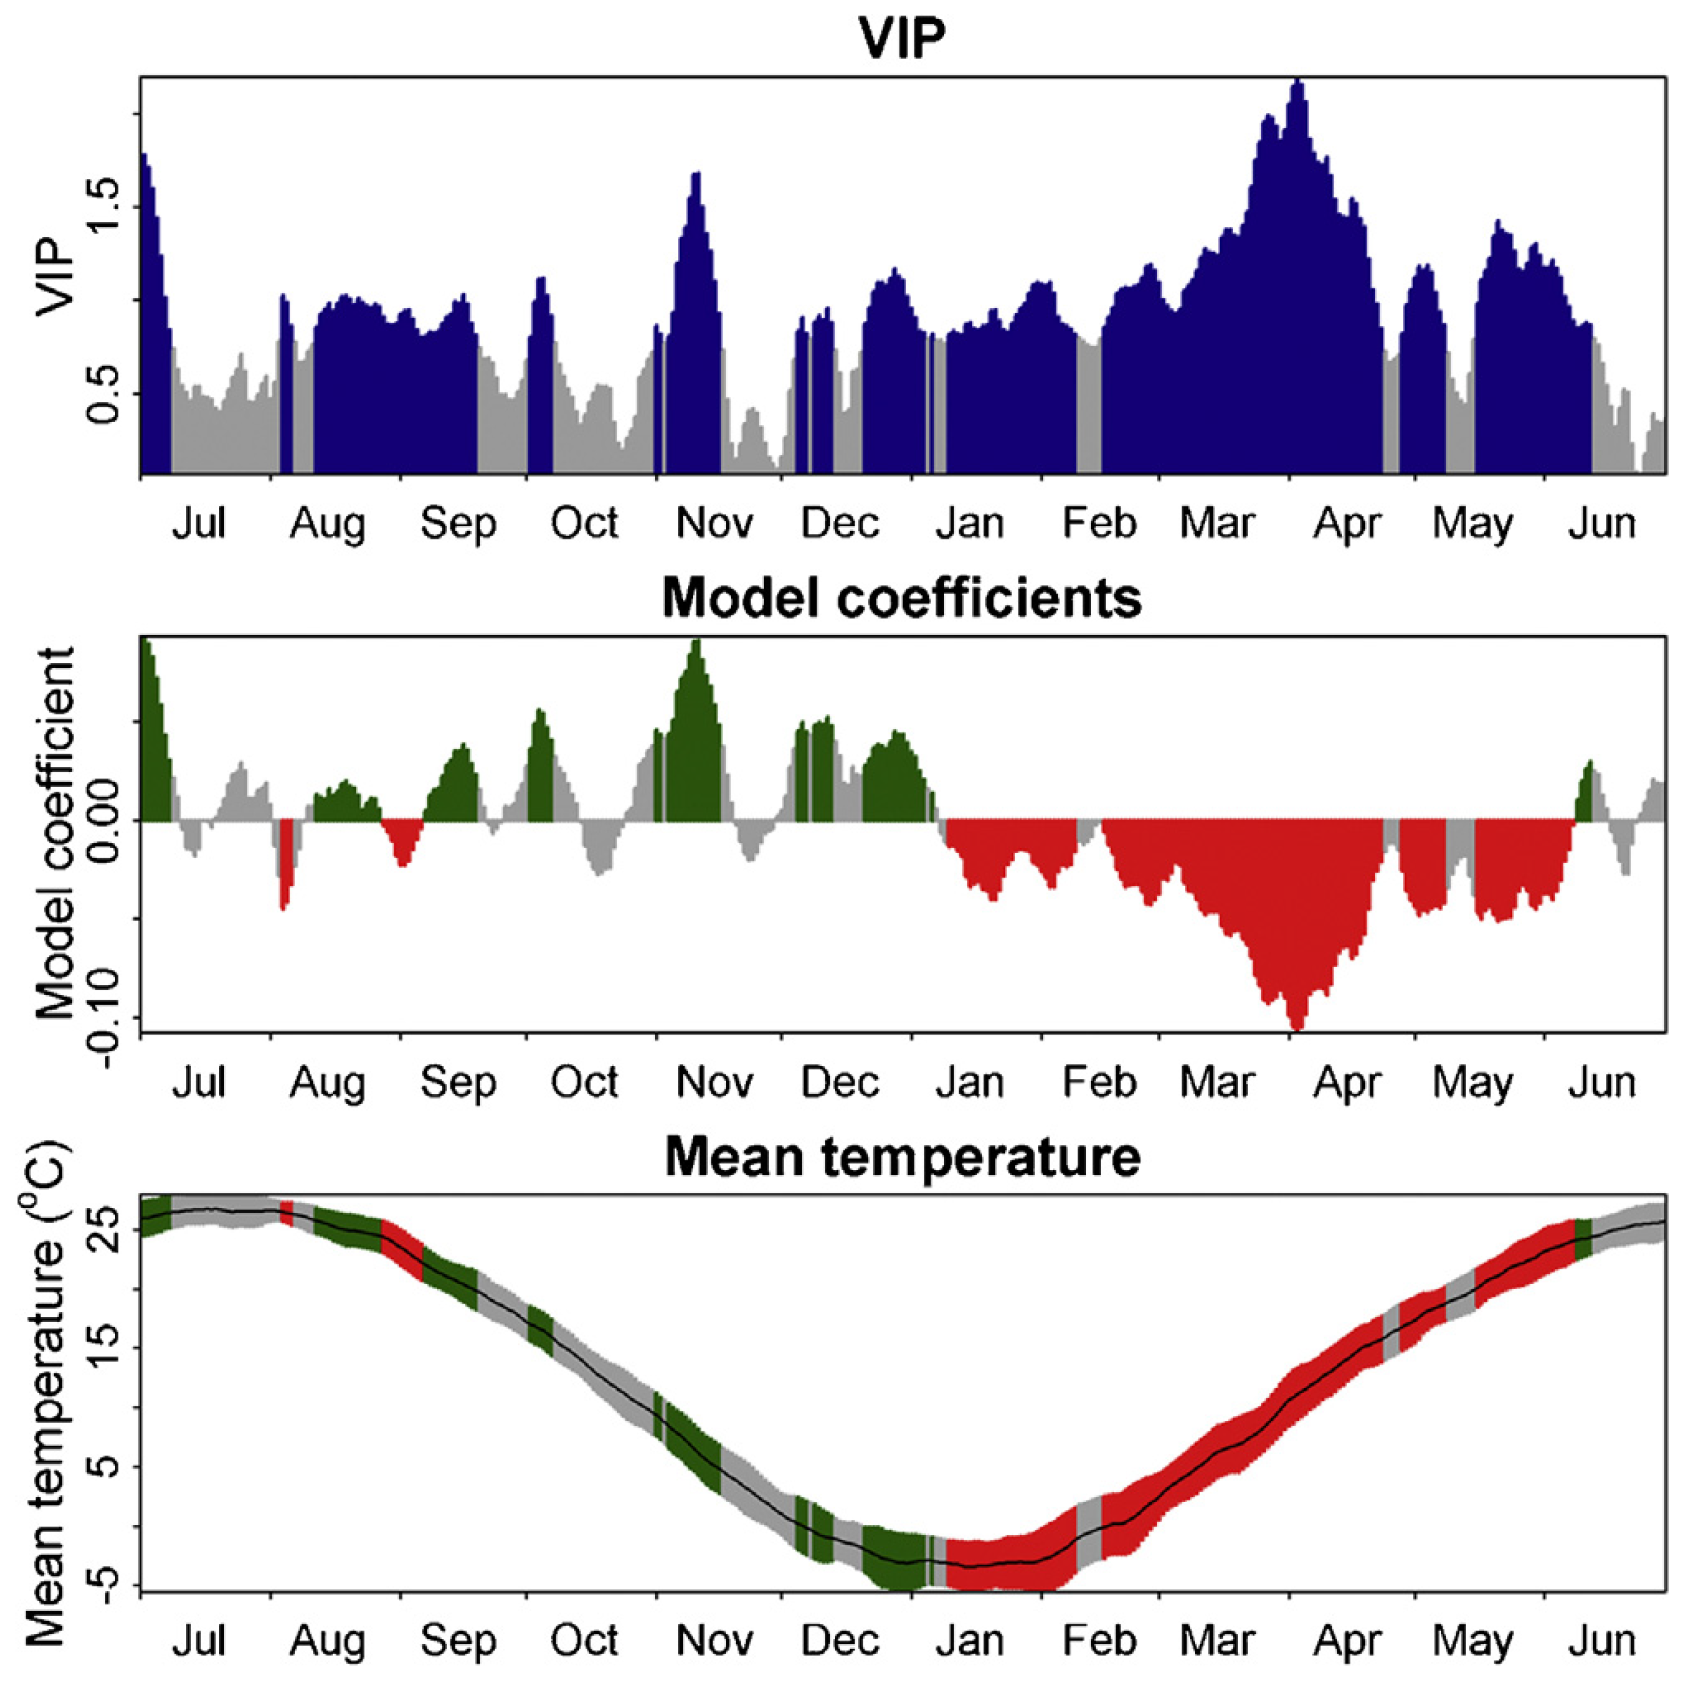 Results of Partial Least Squares (PLS) regression correlating first flowering dates for chestnut at Beijing Summer Palace with 11-day running means of daily mean temperatures from the previous July to June. Blue bars in the top panel indicate VIP values greater than 0.8, the threshold for variable importance. In the middle and bottom panels, red color means the model coefficients are negative (and important), while the green color indicates positive (and important) relationships between flowering and temperature. The black line in the bottom figure stands for the mean temperatures, while the gray, green and red areas represent the standard deviation of daily mean temperatures for each day of the year (Guo et al., 2013)